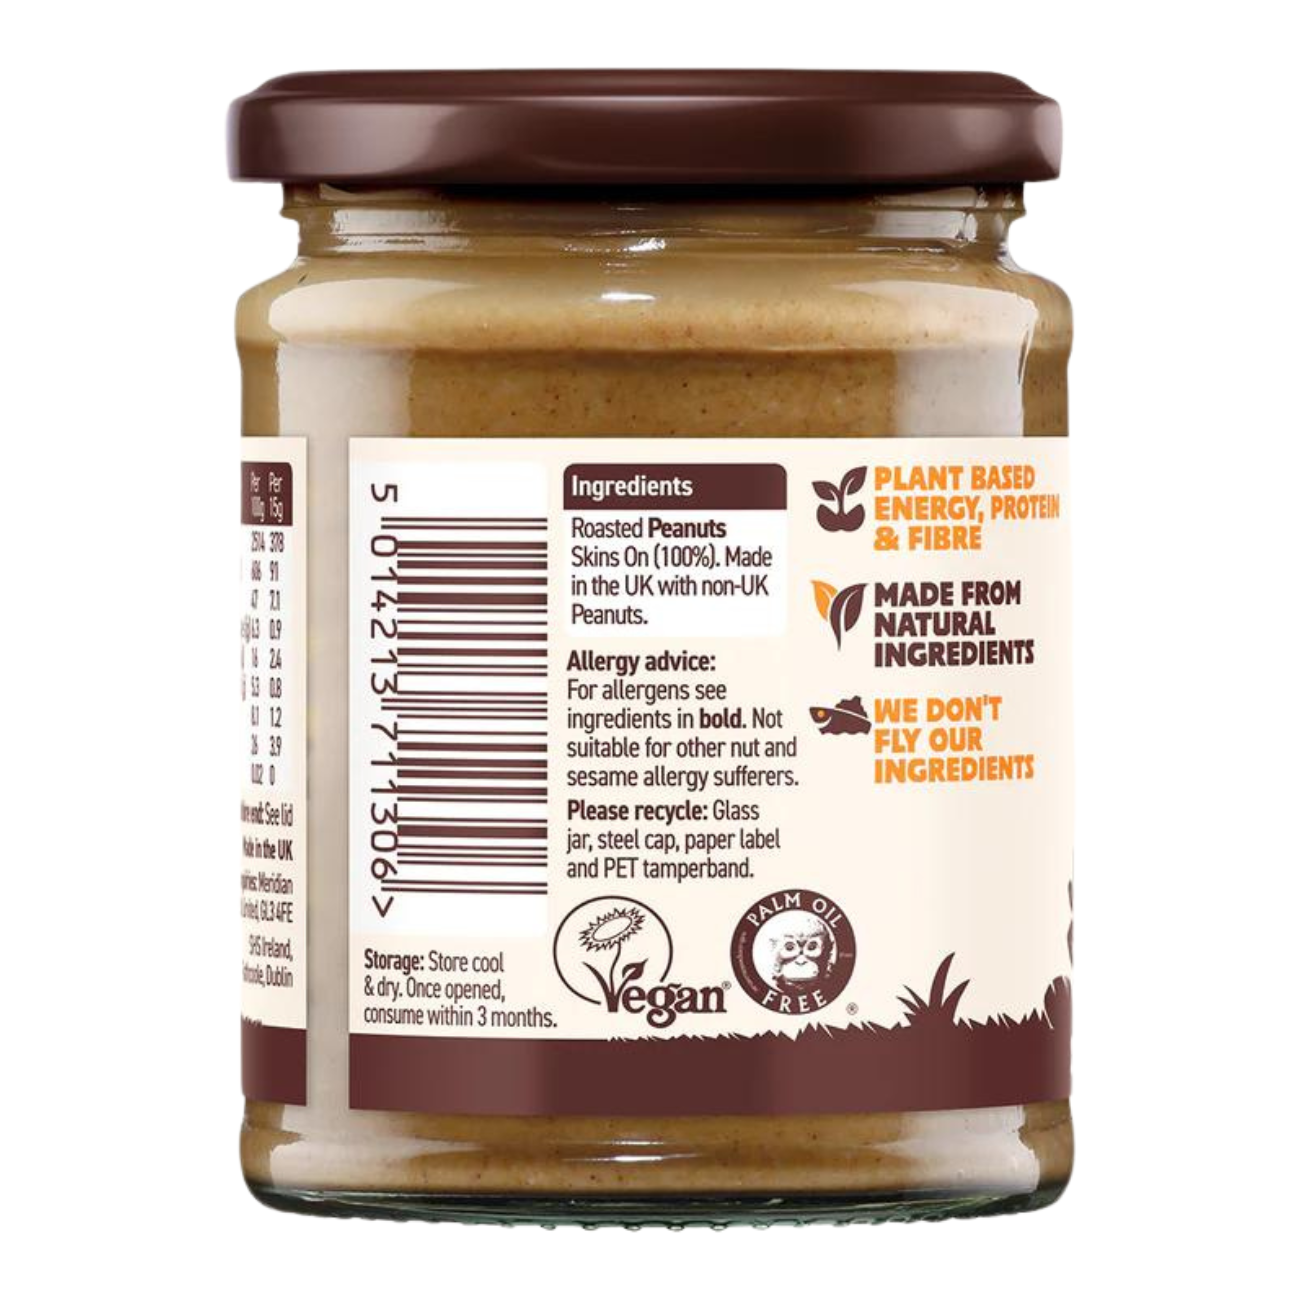 Smooth Peanut Butter 100%  280g